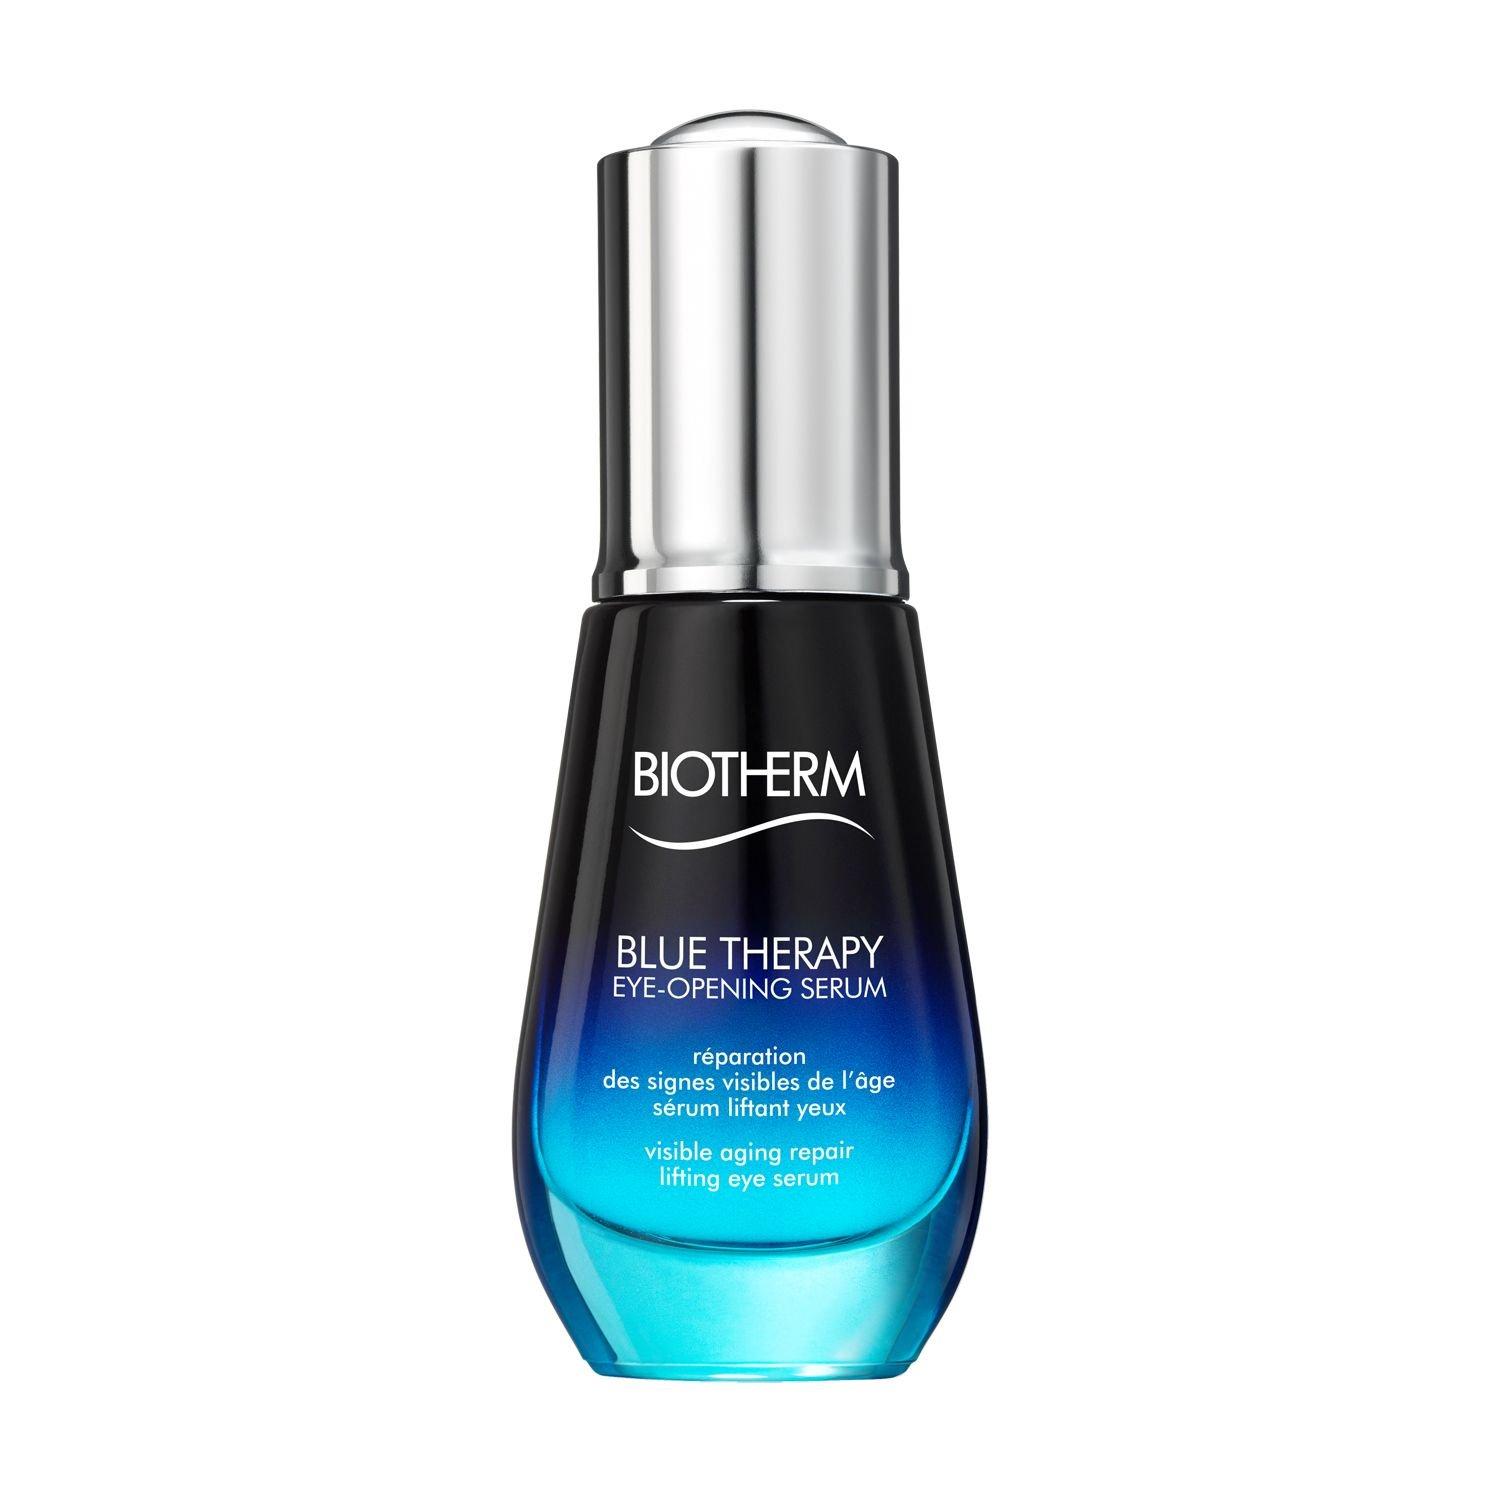 Image of BIOTHERM BLUE THERAPY Blue Therapy Eye-Opening Serum - 16.5ML